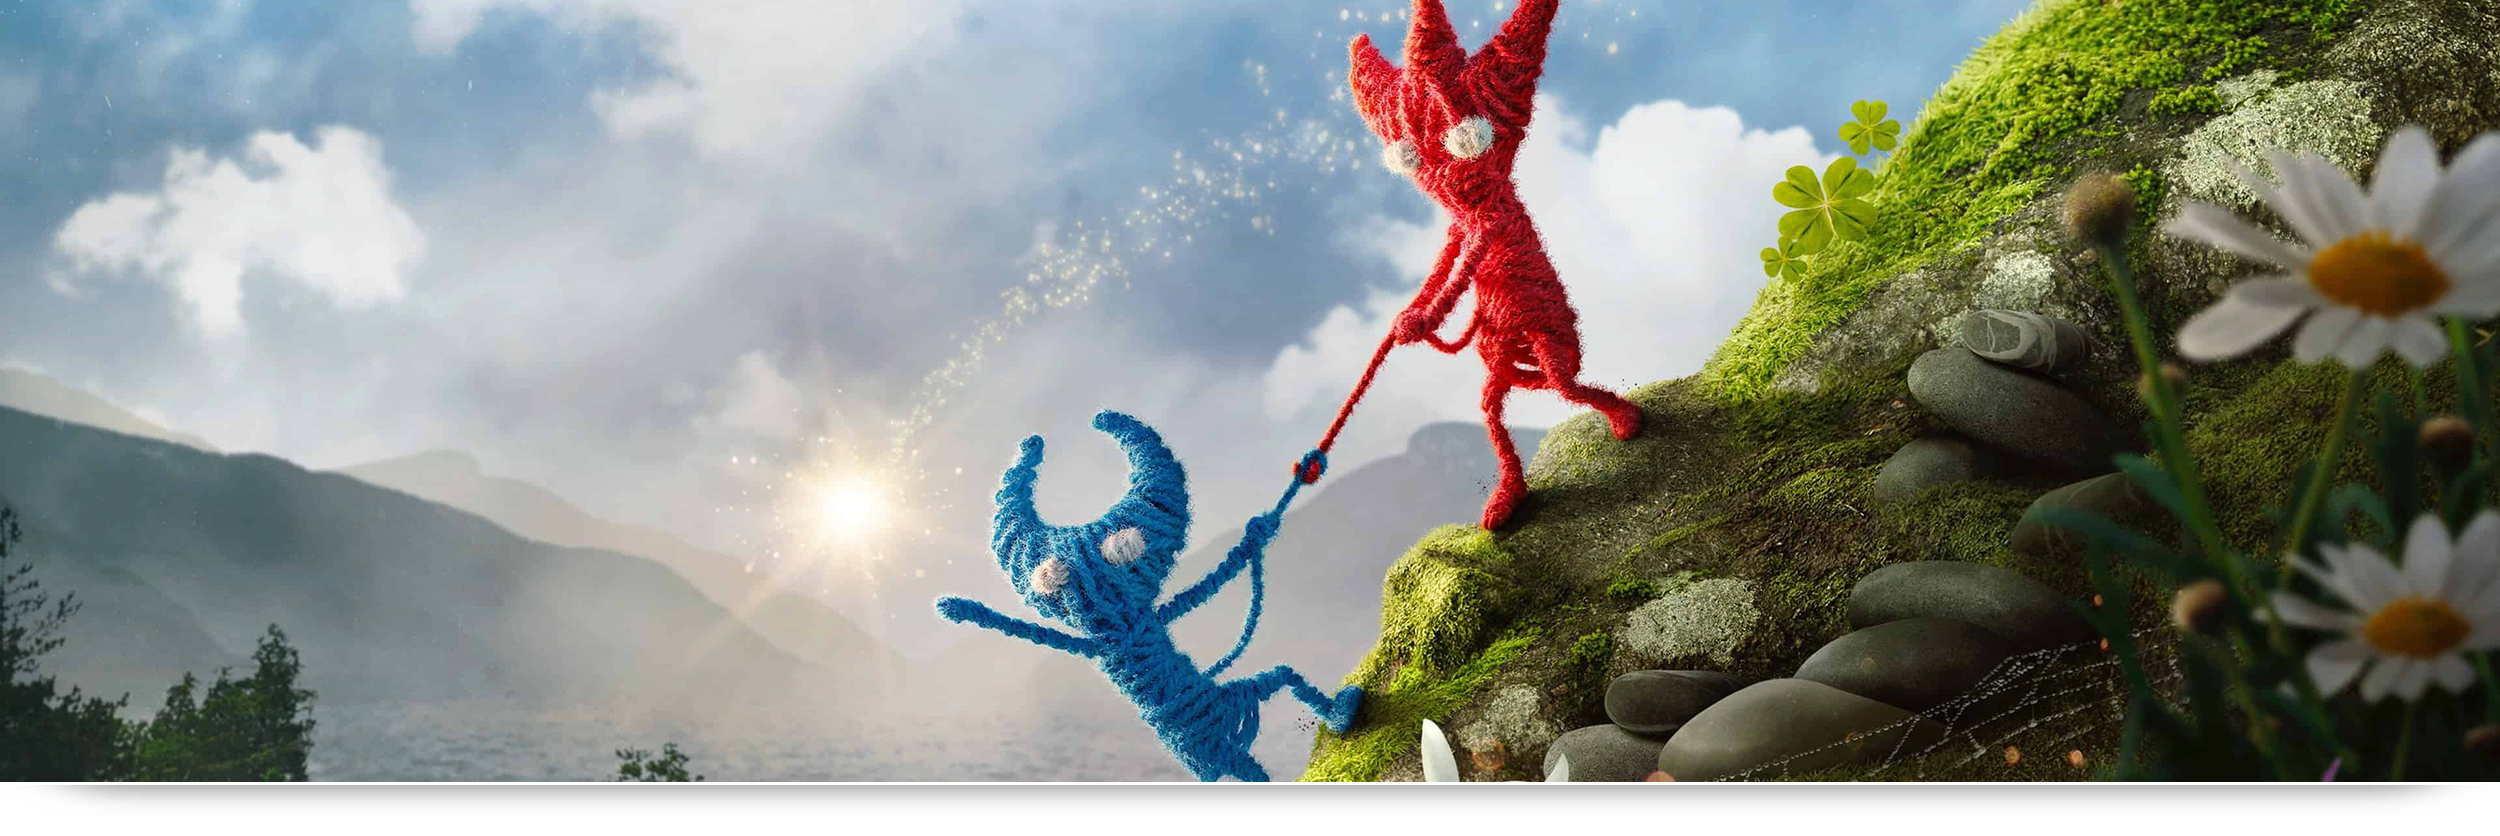 Unravel Two Review - Weaving New Adventures - Game Informer